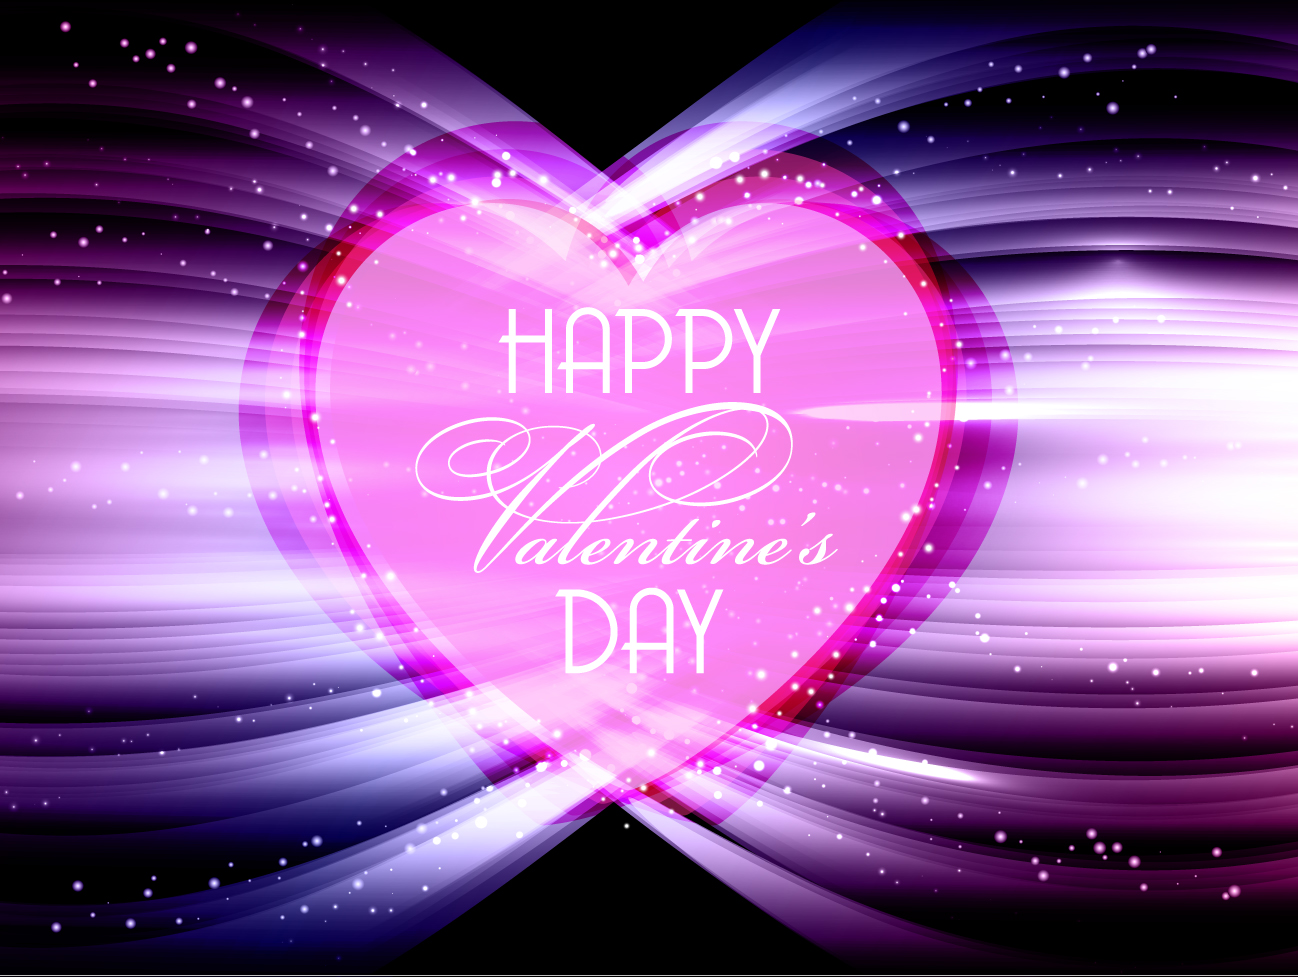 50 Cute Valentines Day Pictures in HD 2016 - Hug2Love